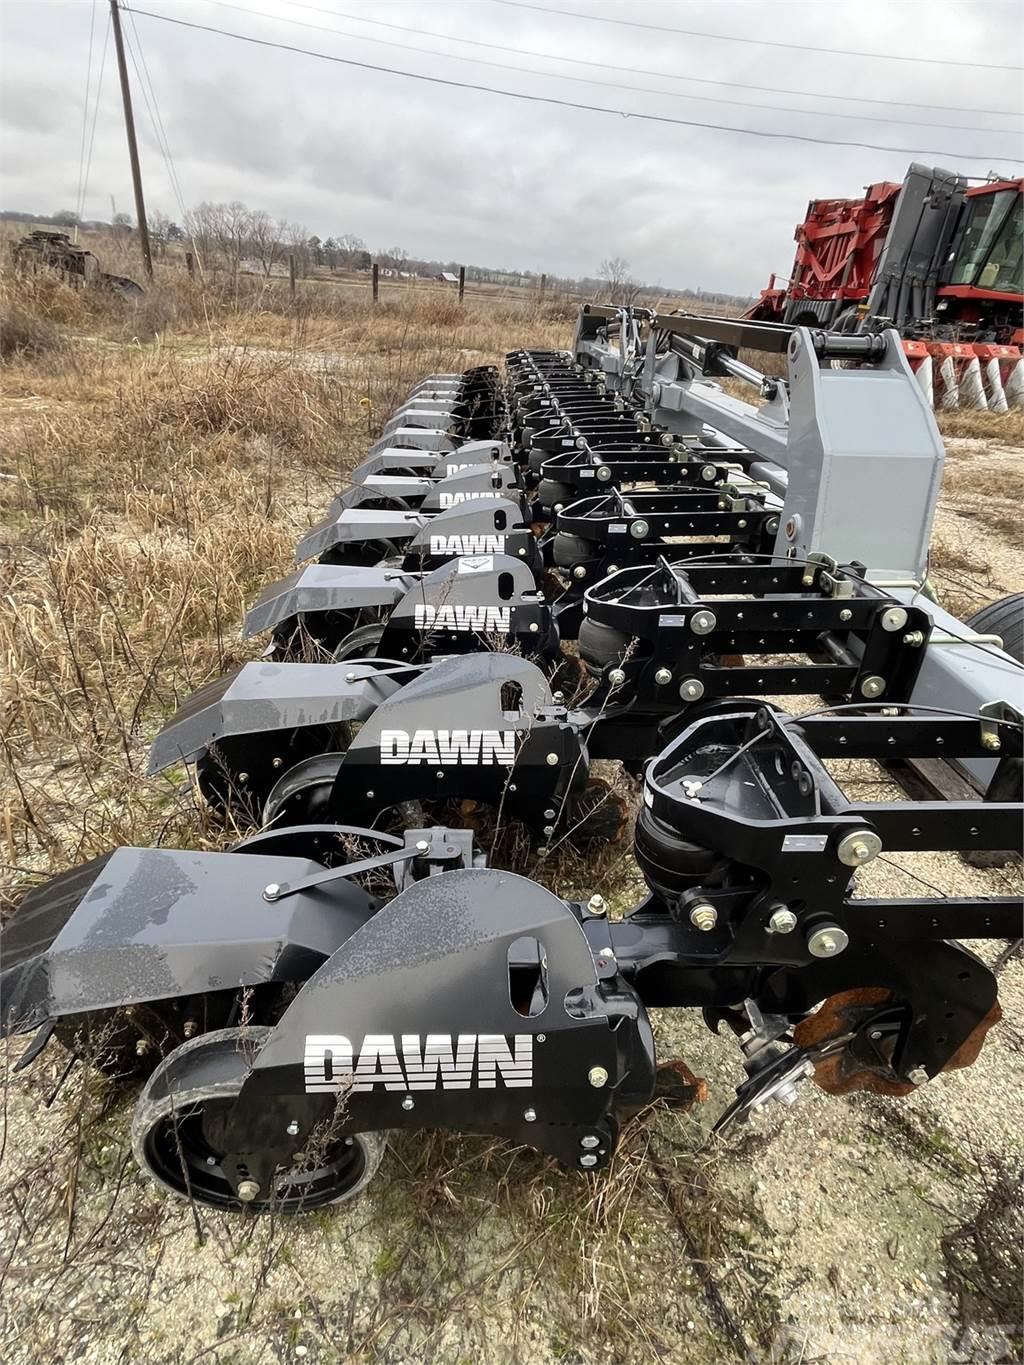  Dawn 1238 Pluribus Other tillage machines and accessories